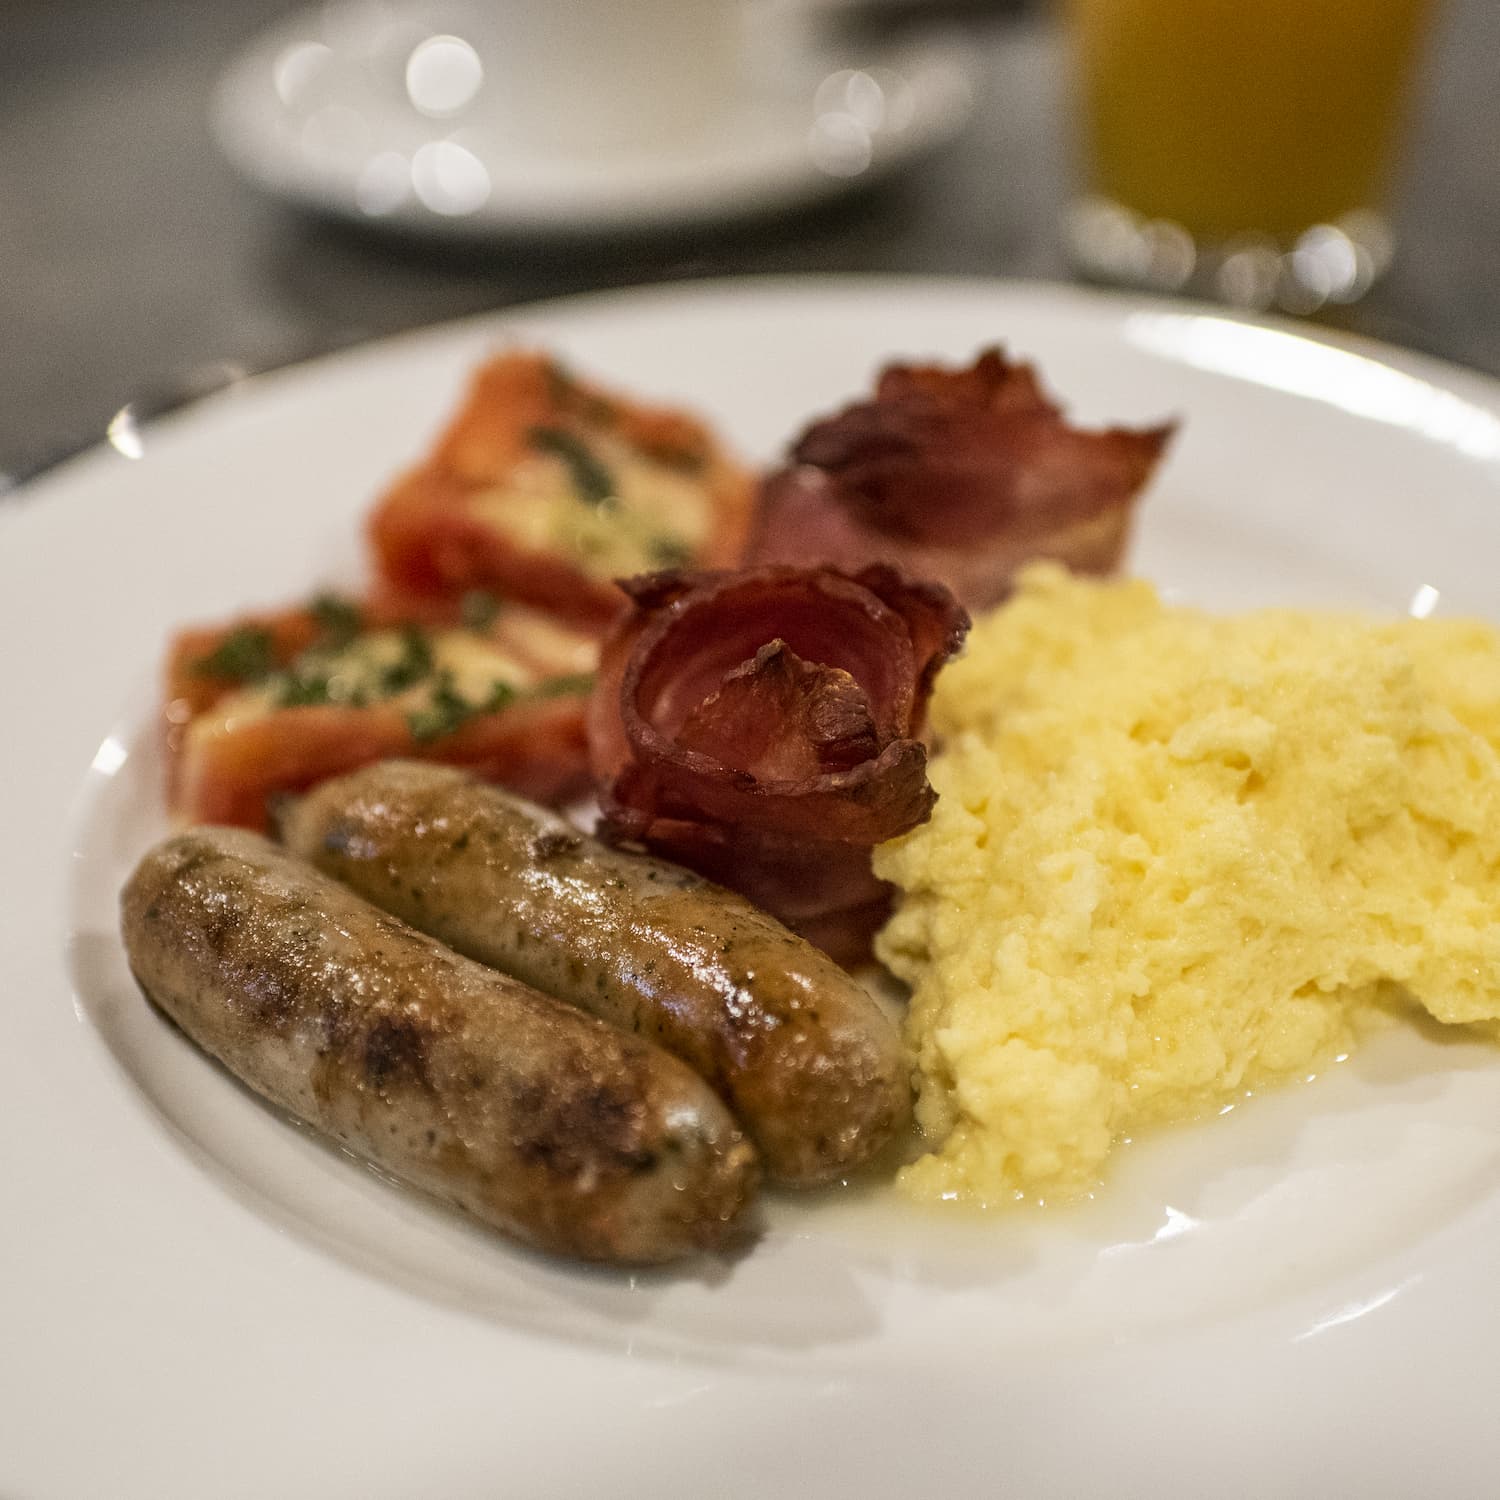 Plate with cooked sausages, grilled tomatoes, bacon and scrambled eggs